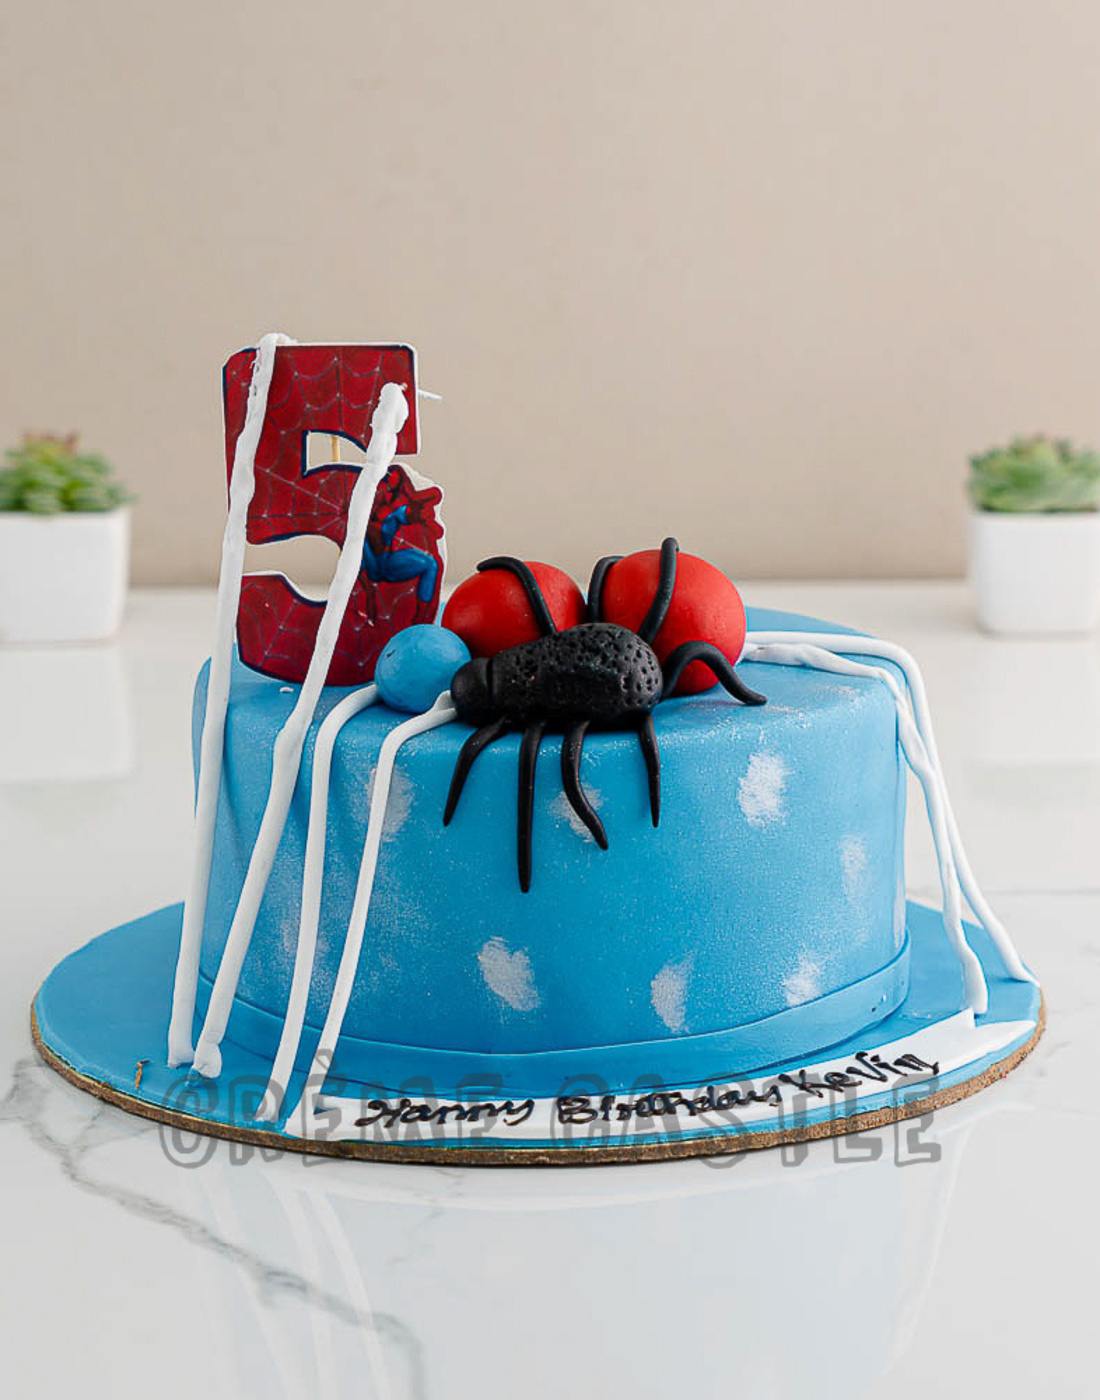 Spiderman Edible Web Background Cake Topper Frosting 1/4 Sheet Image  ABPID04362 - Walmart.com